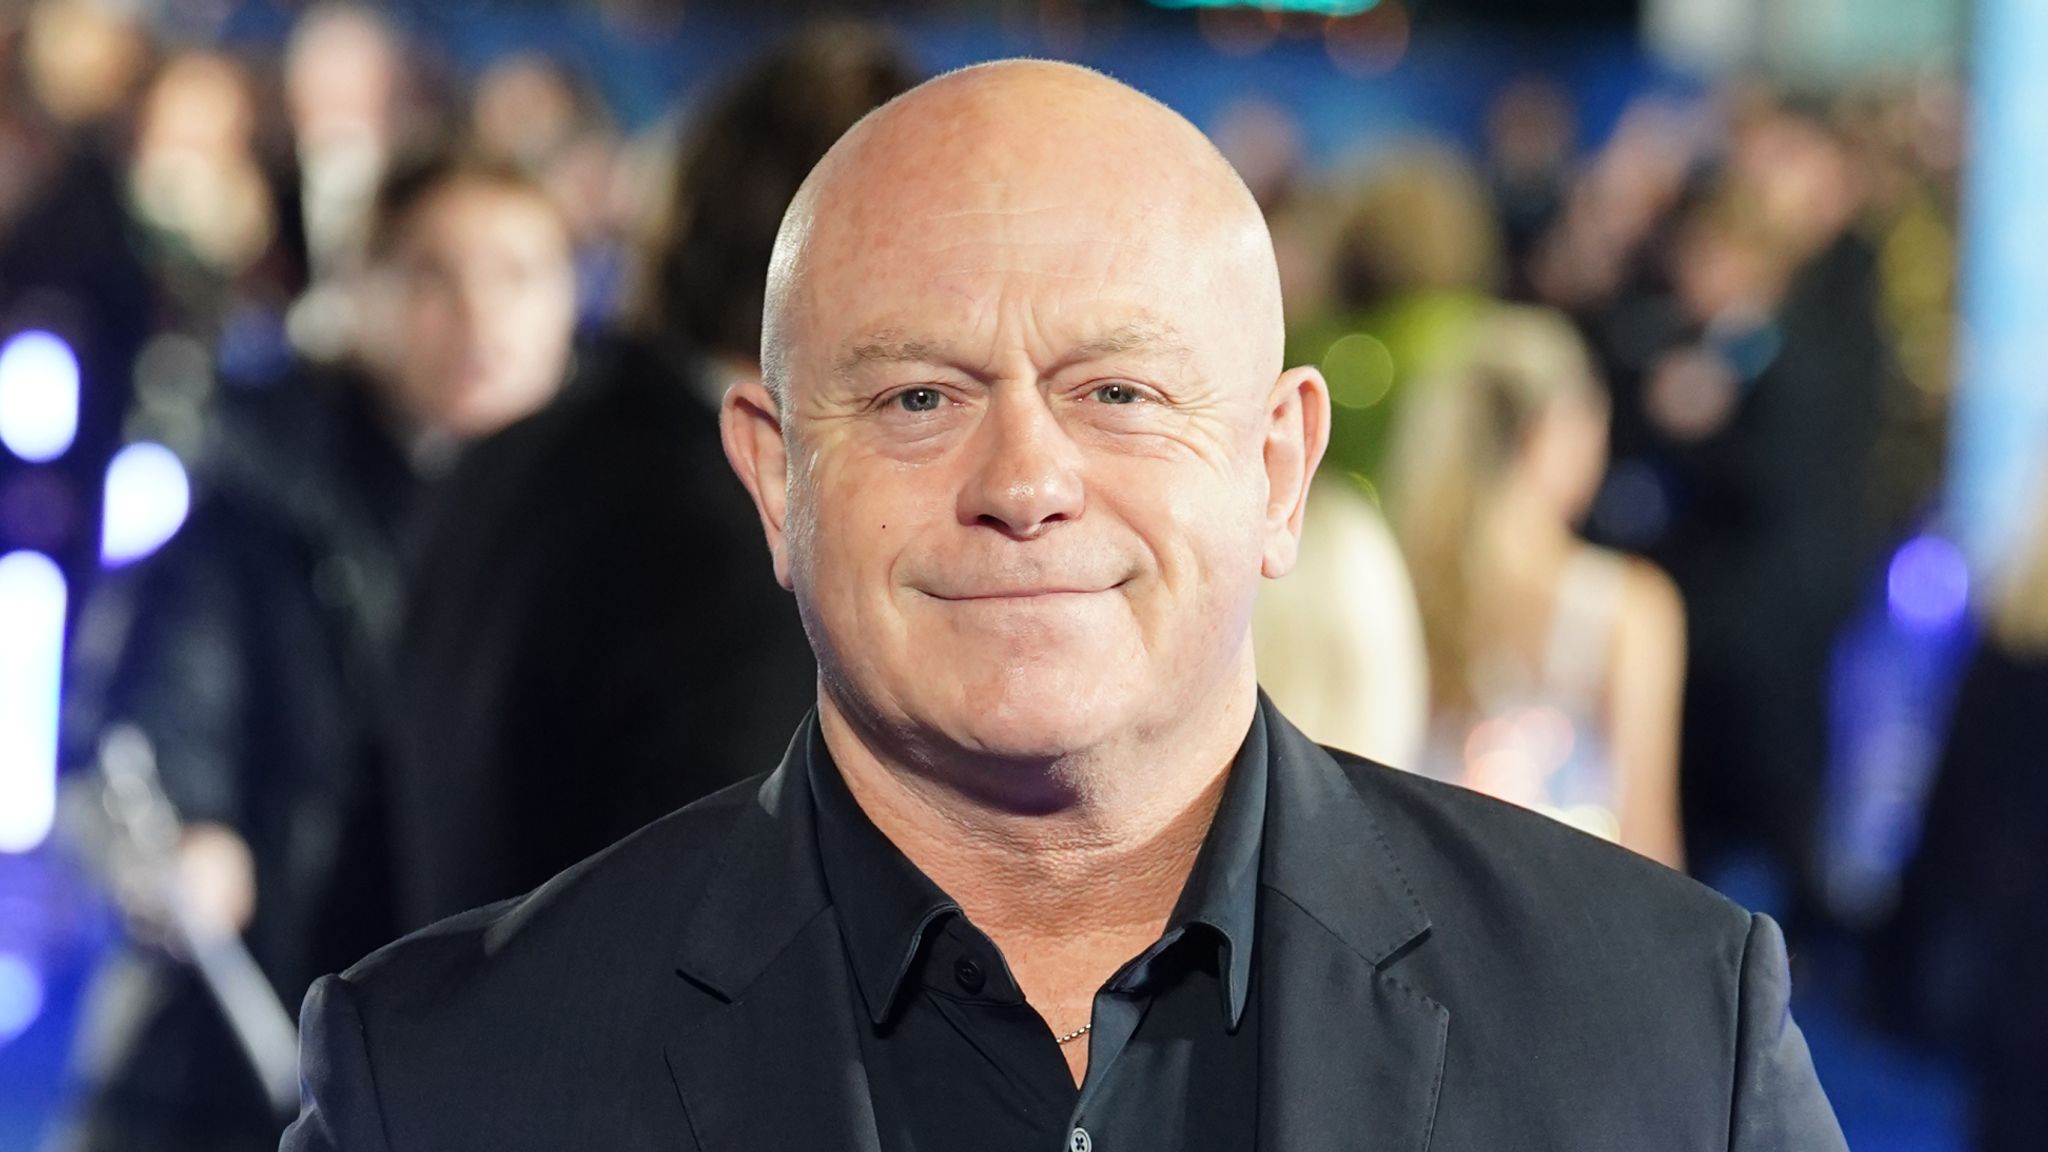 Ross Kemp turned down OceanGate submersible trip to Titanic wreck over  safety fears, UK News